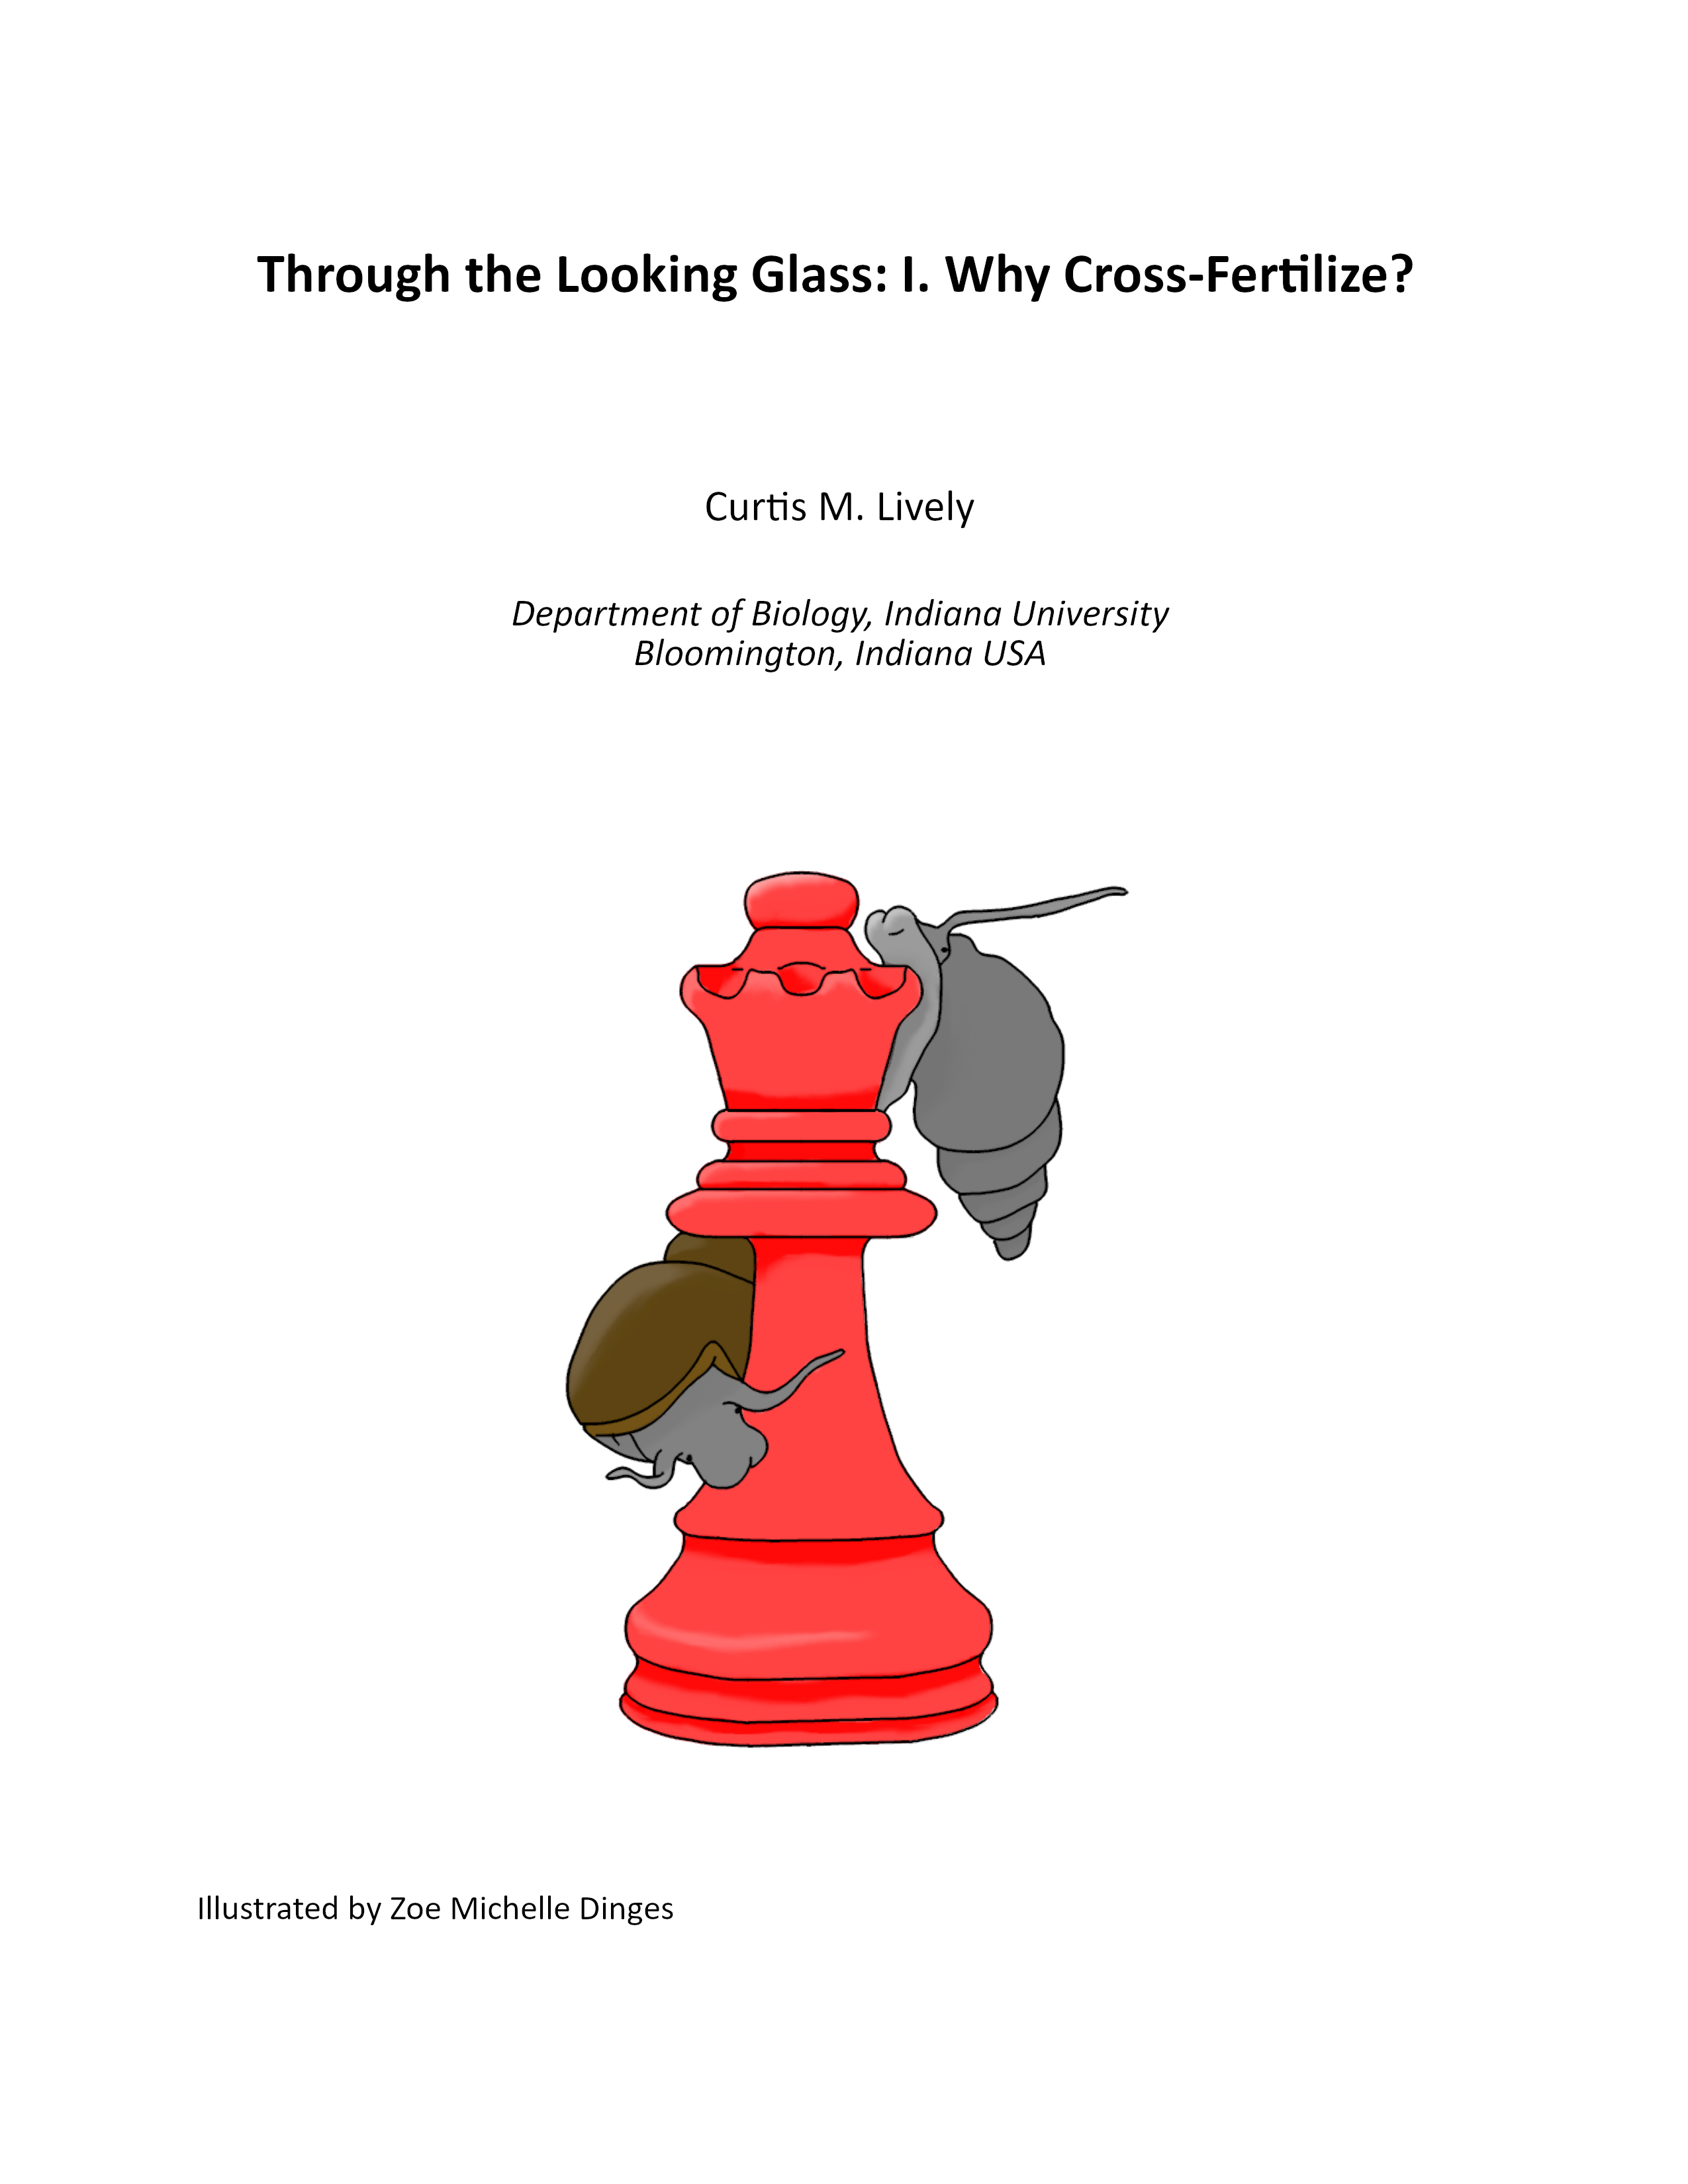 Book cover with title, author, illustrator, and illustration of red queen chess piece being crawled on by two snails.